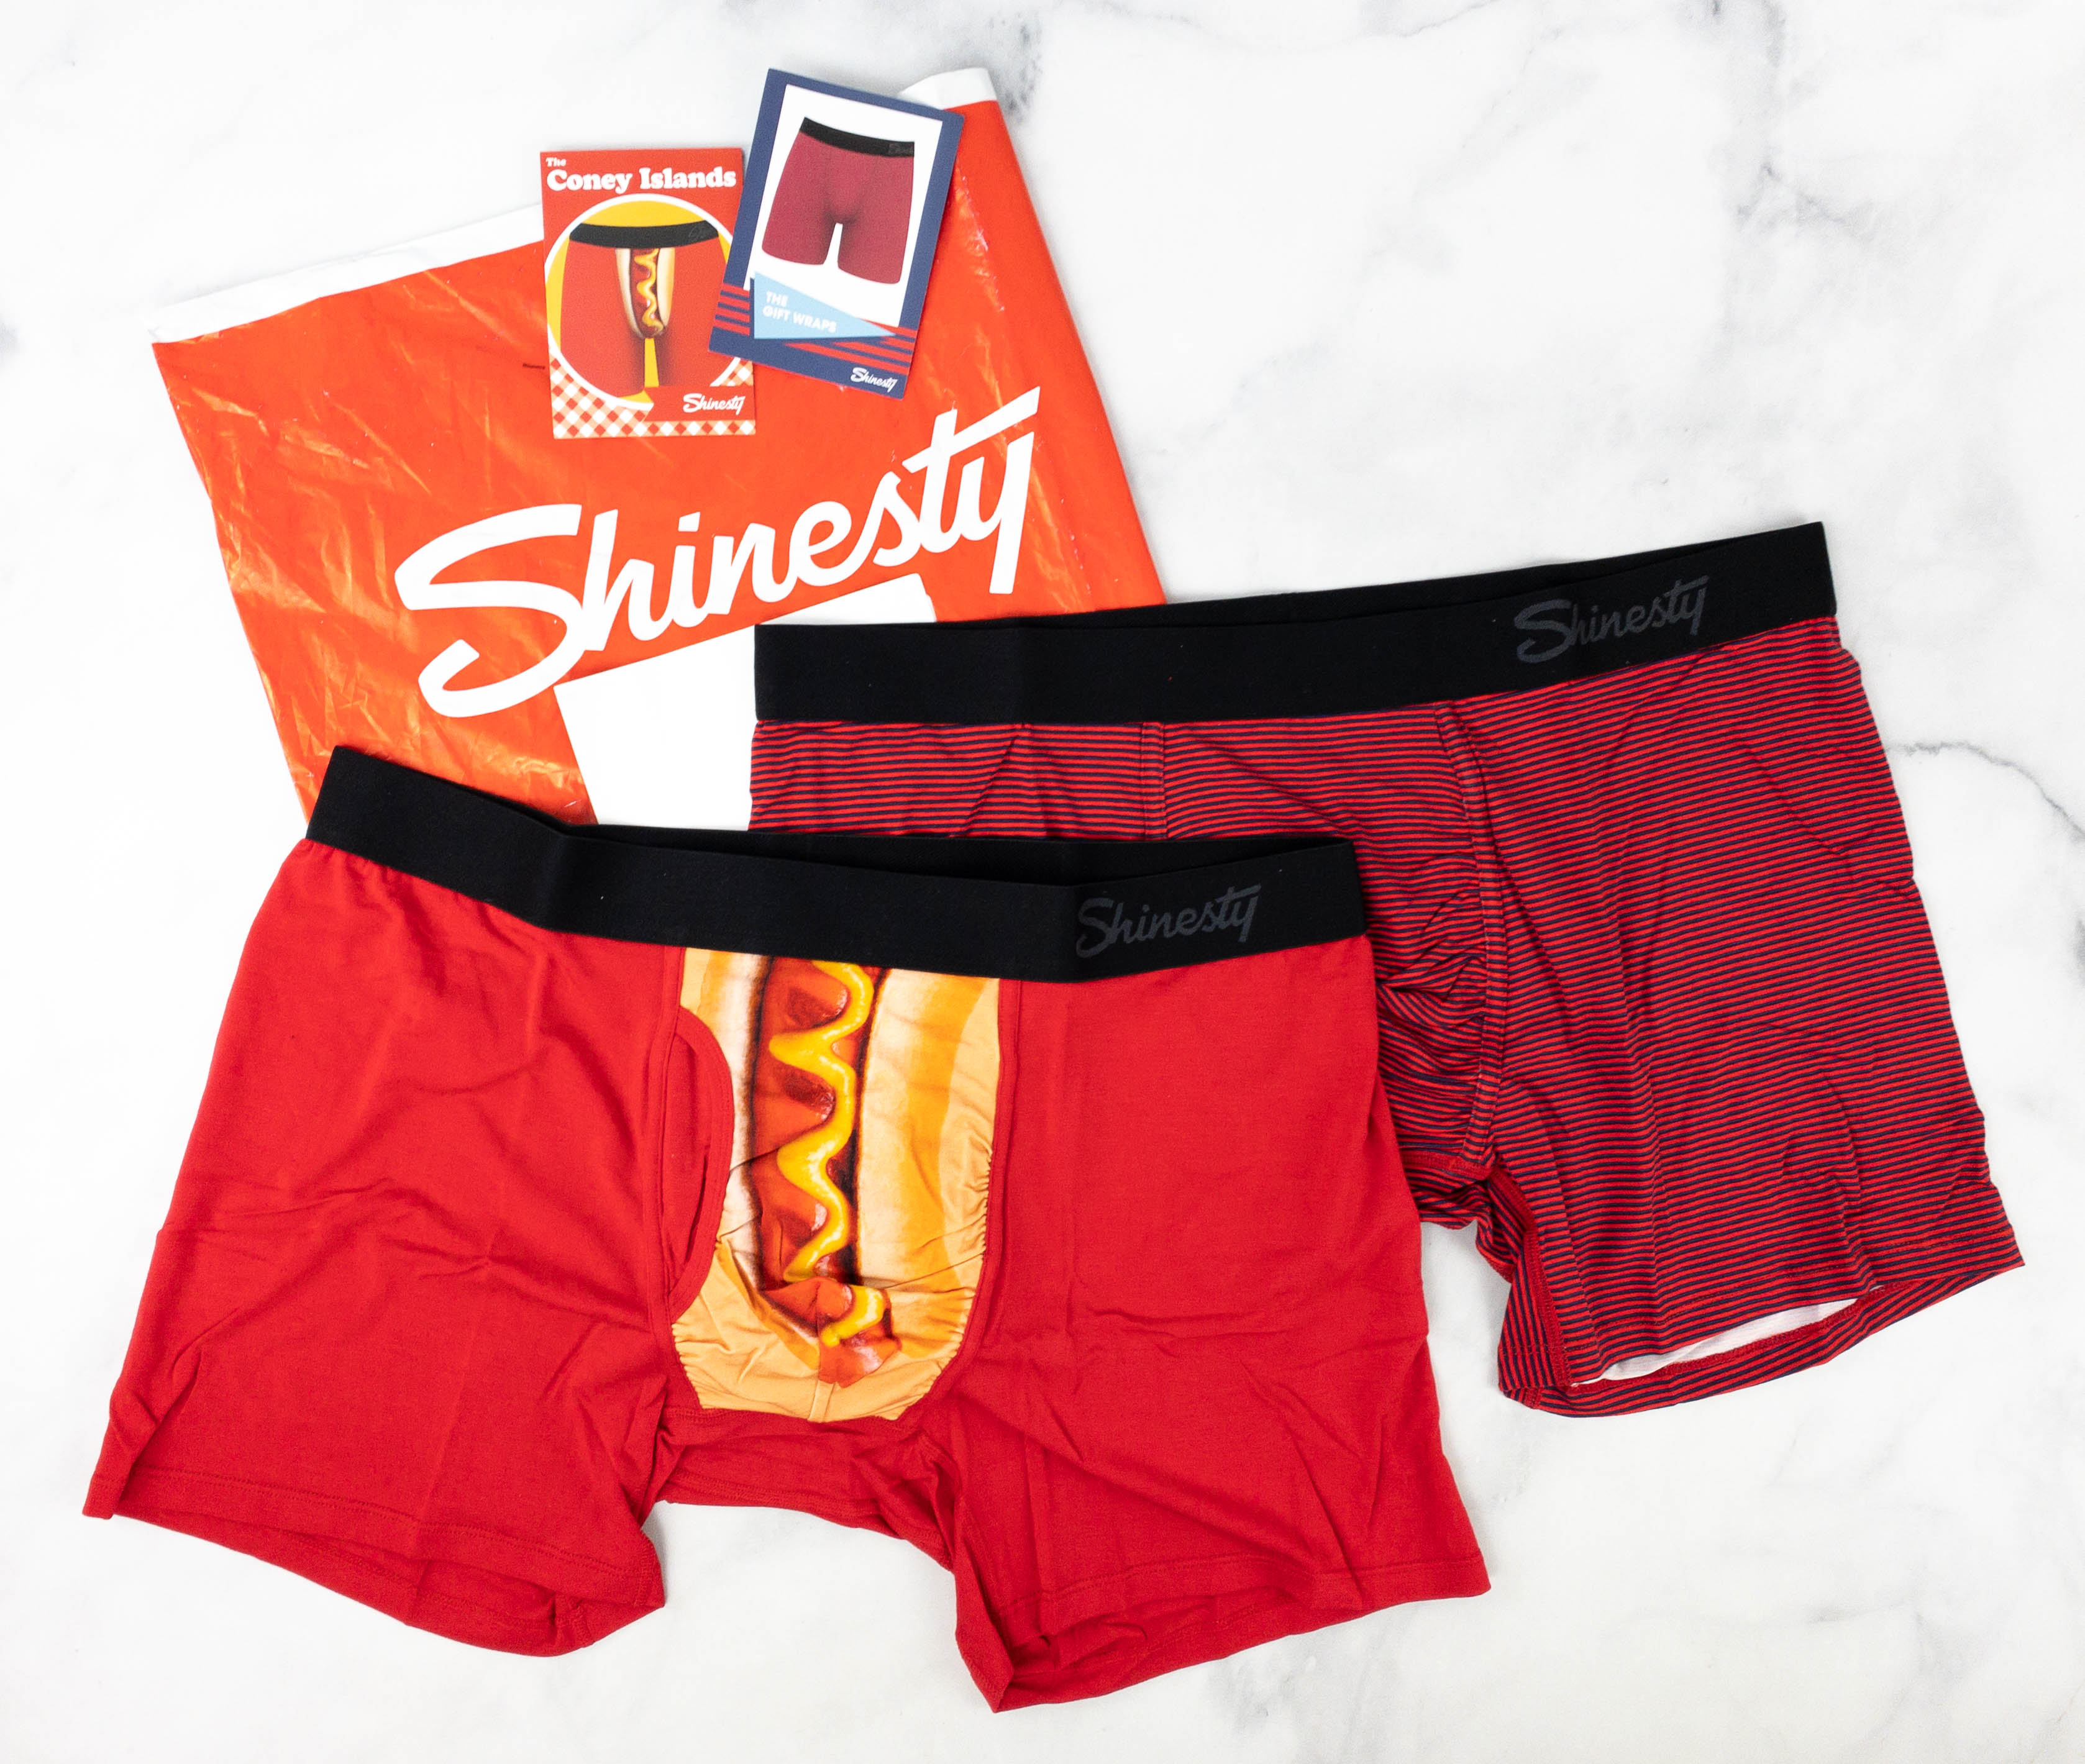 Shinesty Coupon: Get 15% Off First Undies Order! - Hello Subscription